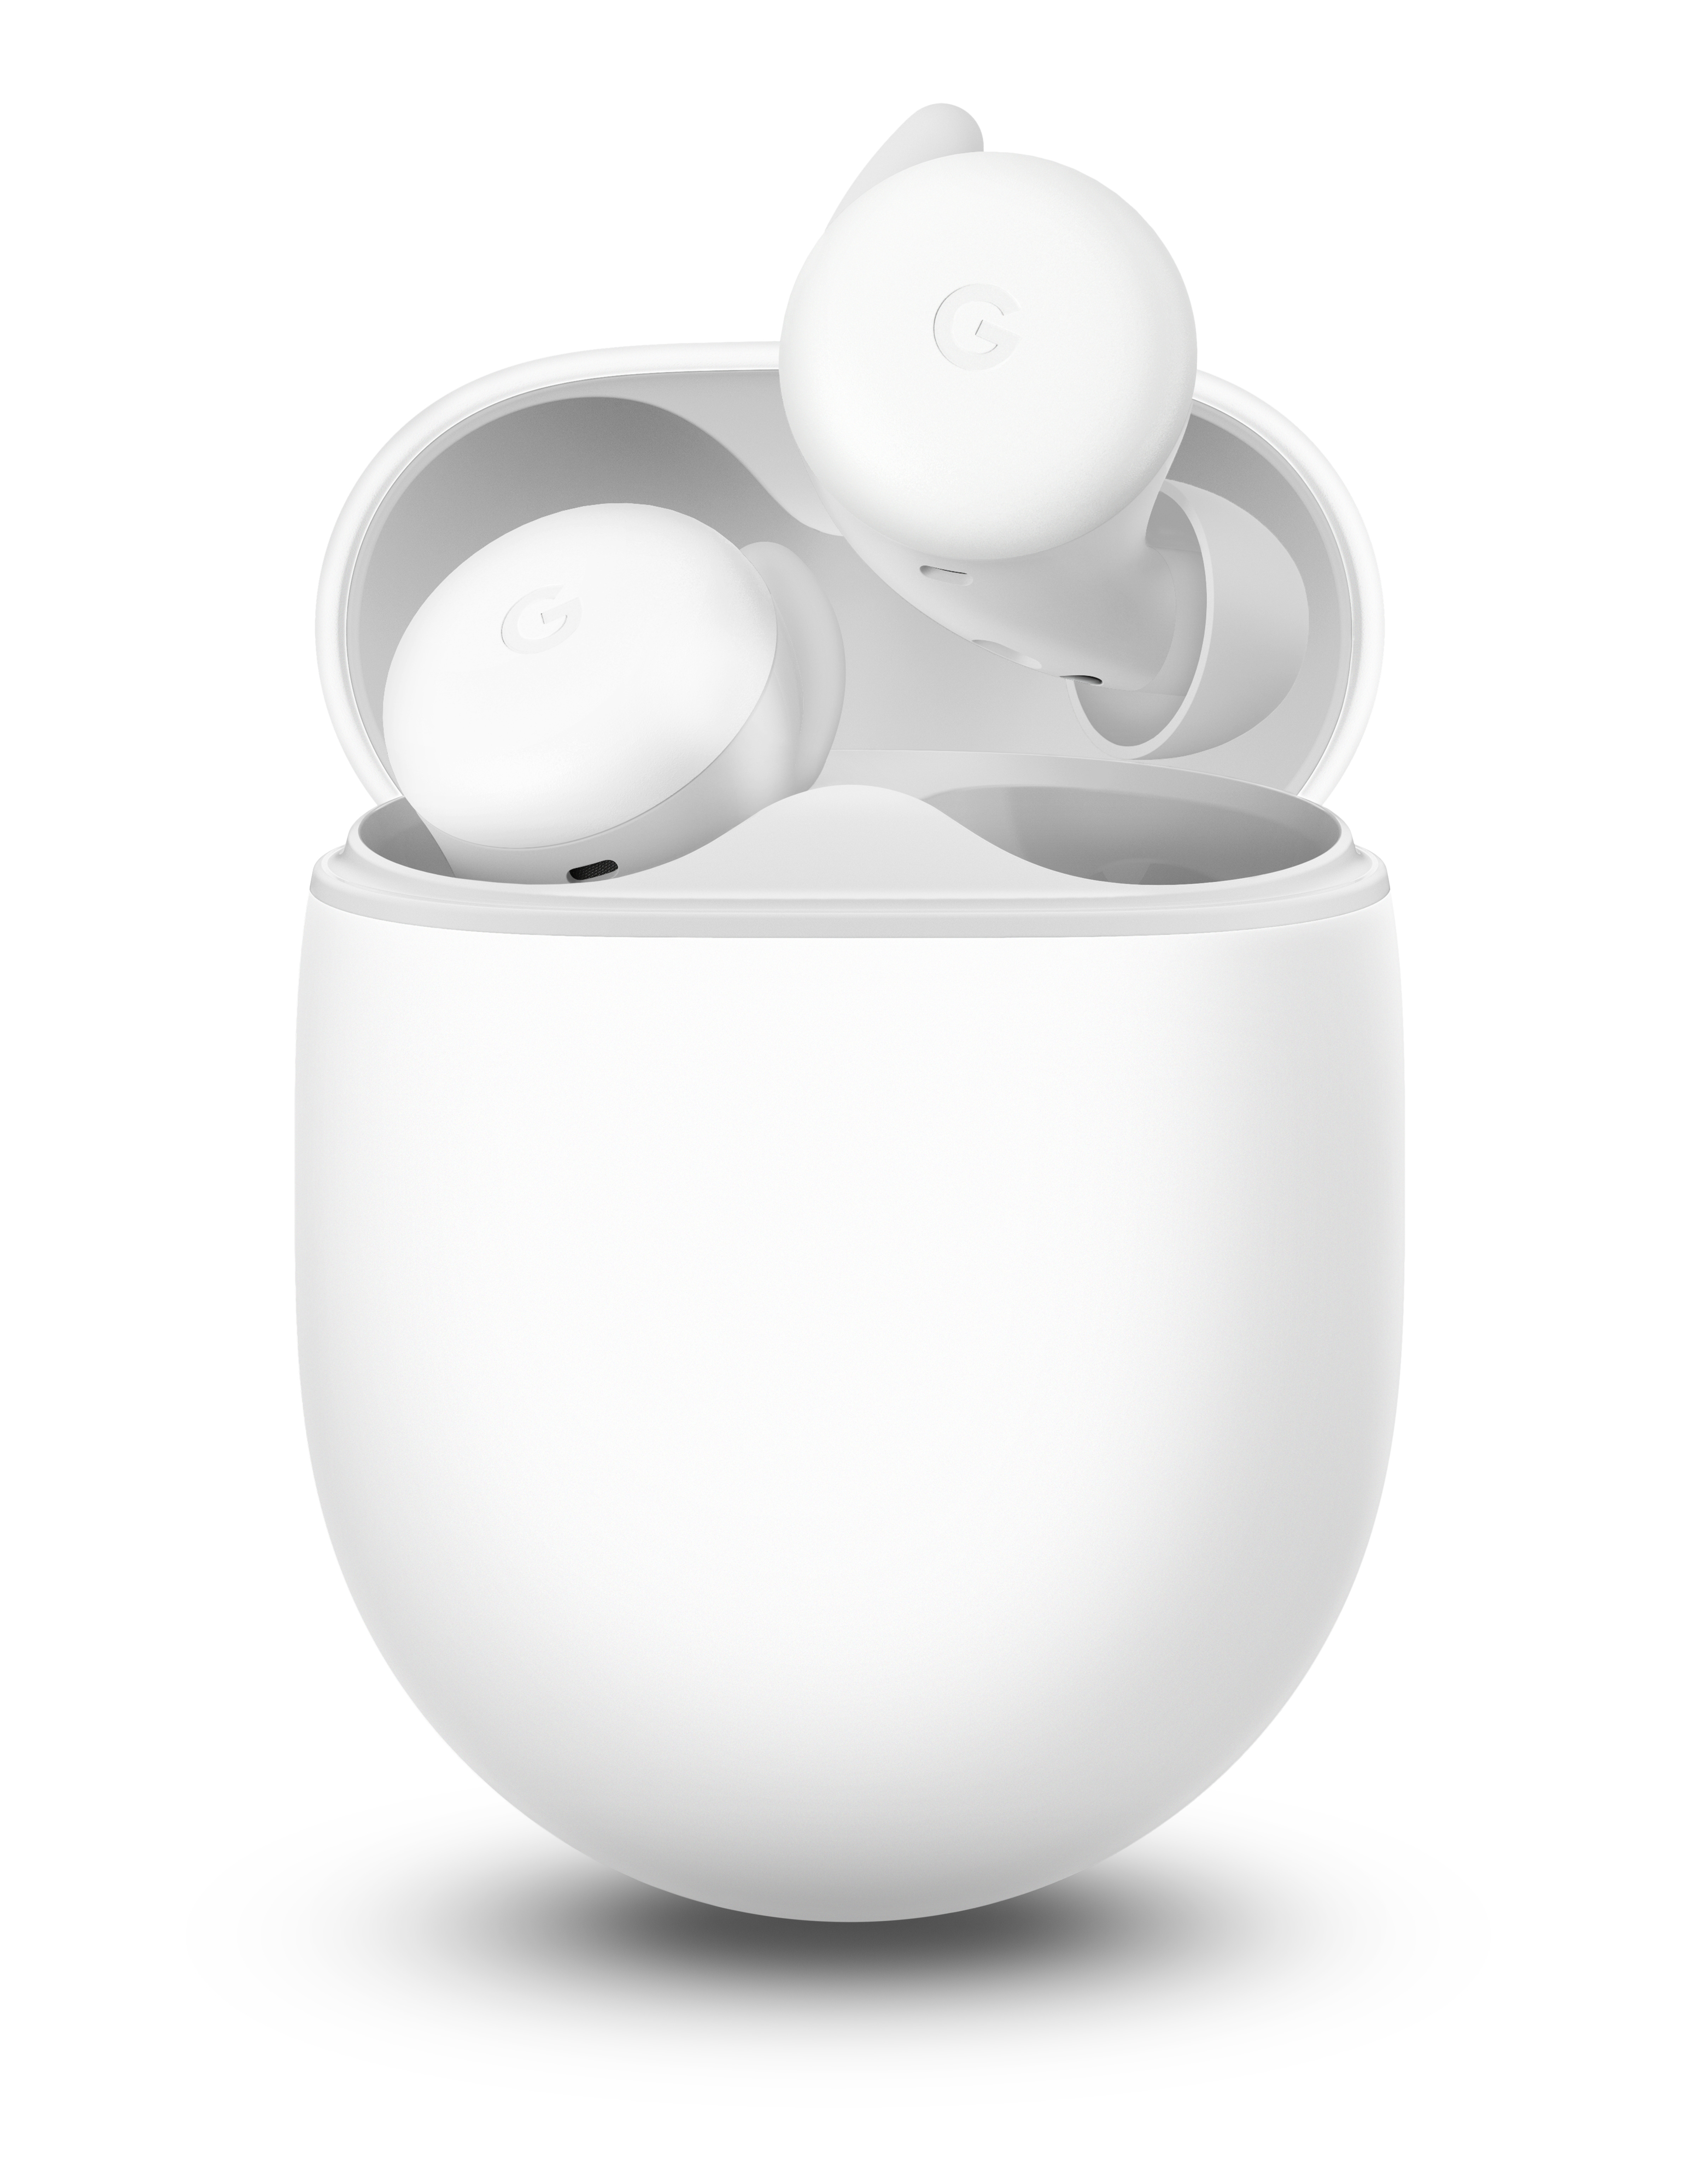 Google Pixel Buds A-Series - Truly Wireless Earbuds - Audio Headphones with Bluetooth - White - image 2 of 8